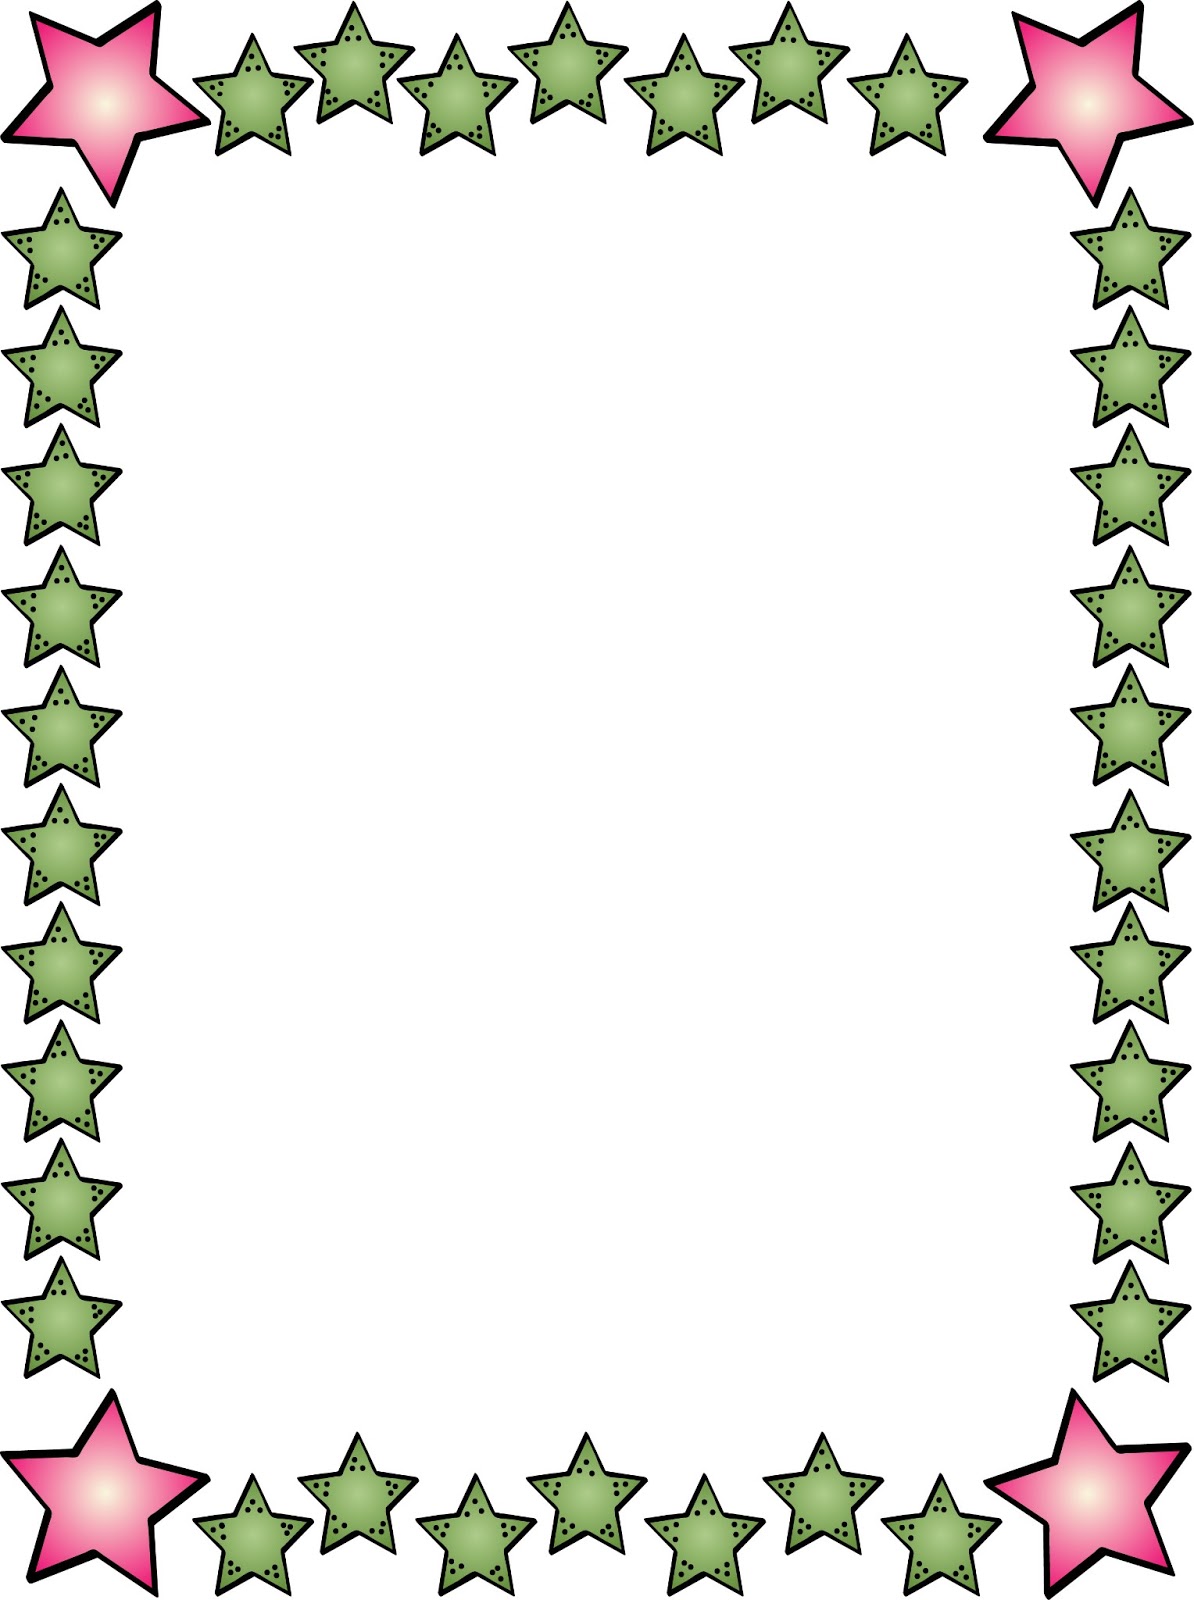 Star Borders And Frames - ClipArt Best